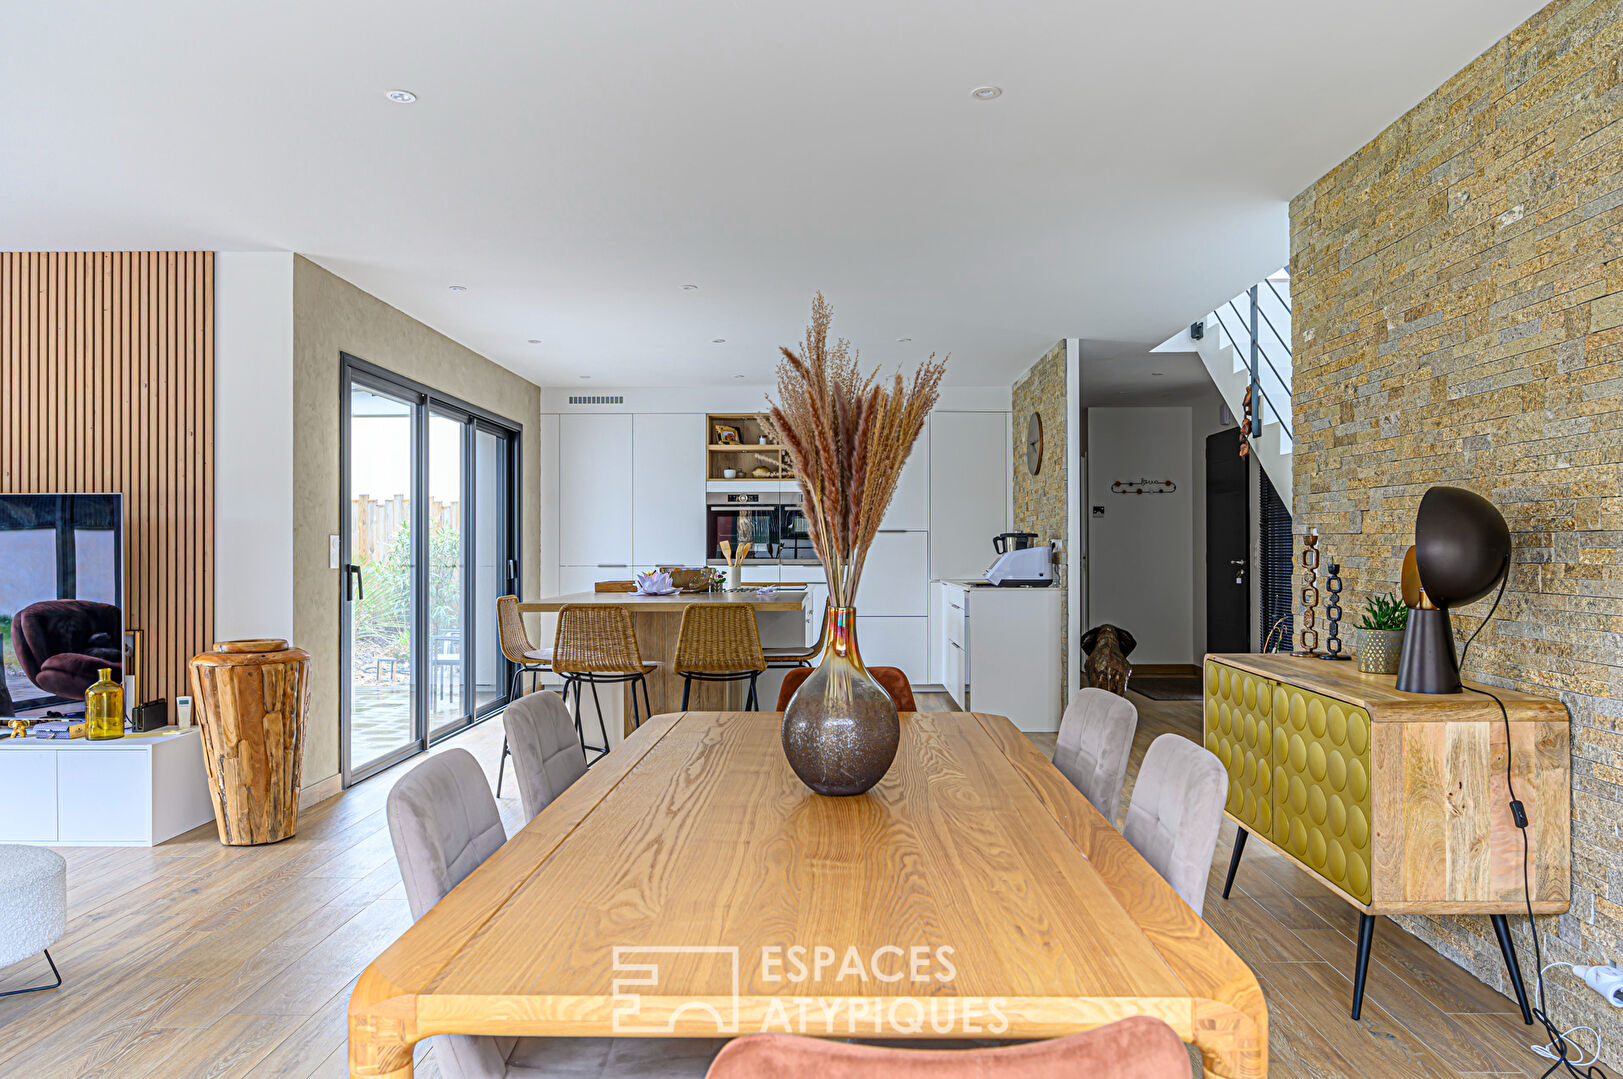 Contemporary with its landscaped garden in Vannes